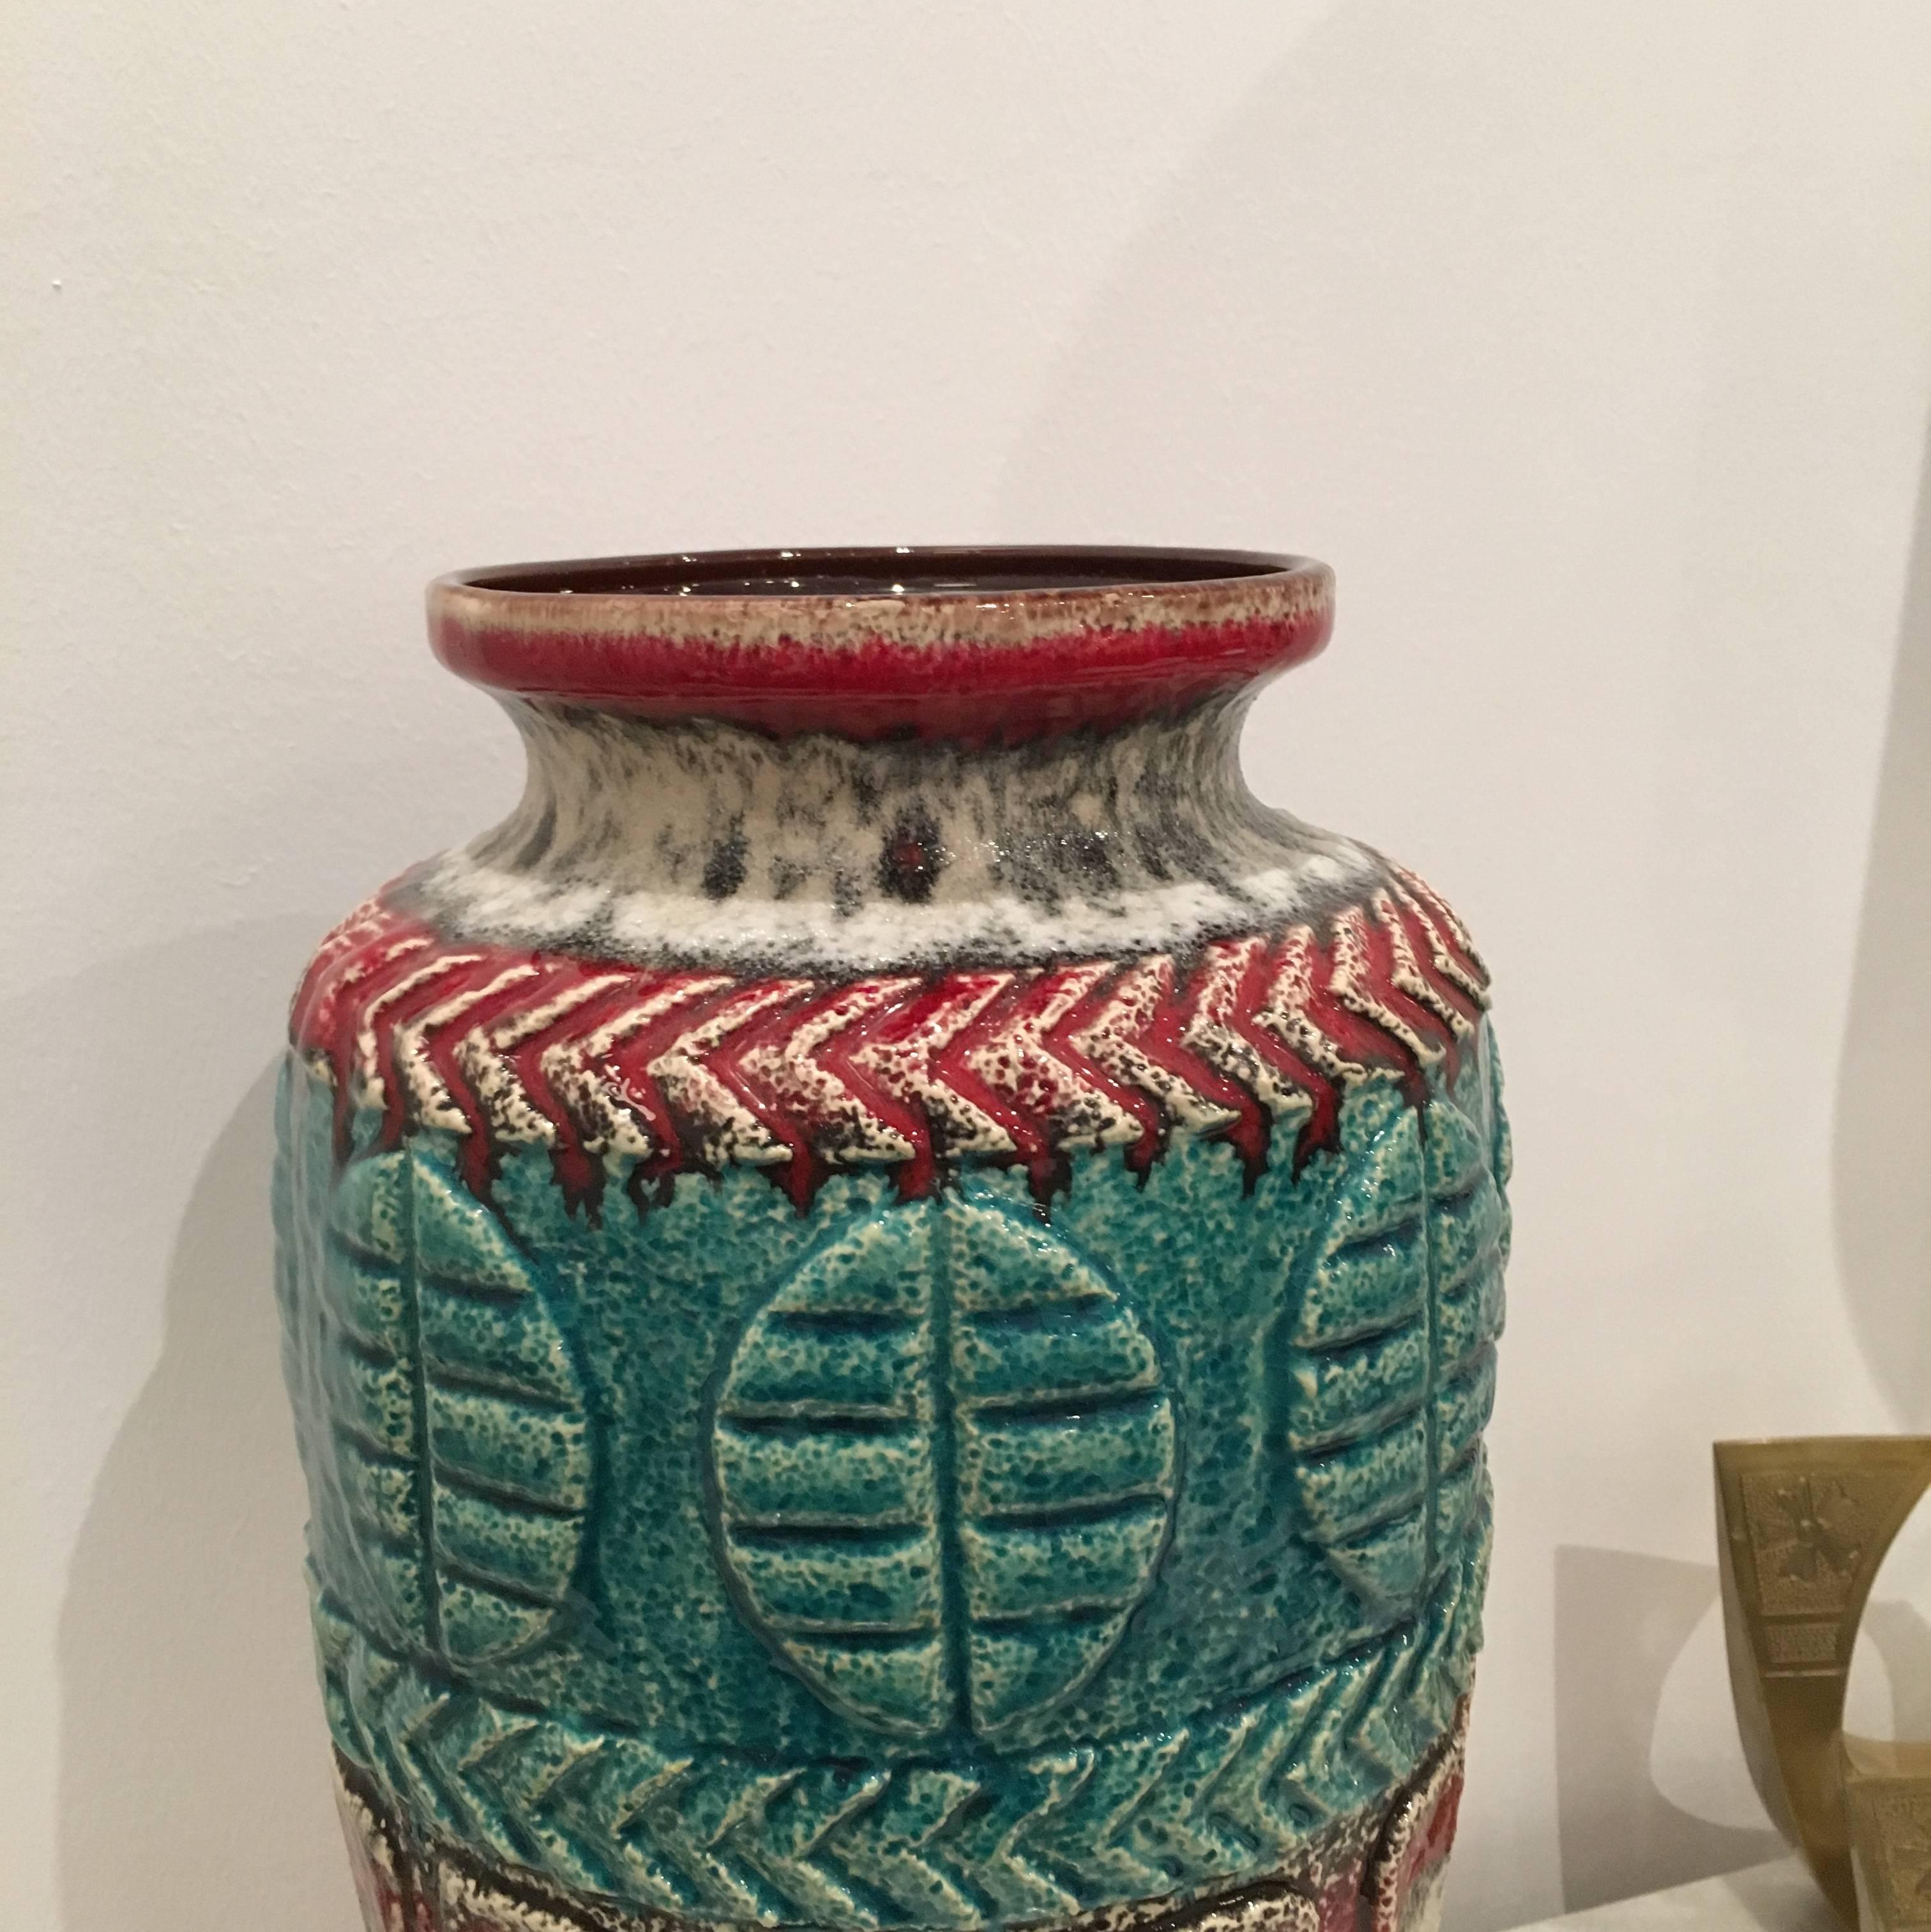 The offered vase is signed by one of West Germany's most prolific pottery manufacturer, Bay.  This piece is quite beautiful and highly representative of mid-20th century modern West German pottery with vivid colors of turquoise blue, cherry red and